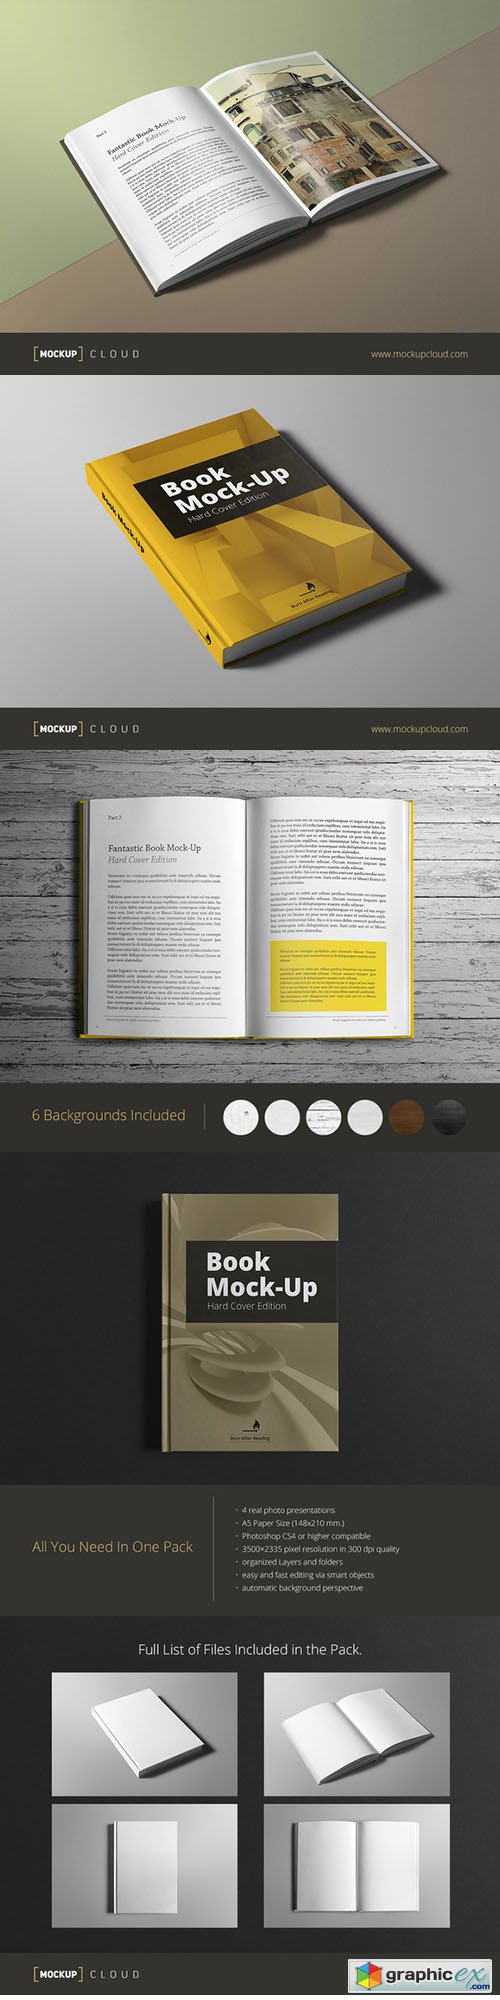  Book Mock-Up / Hard Cover Edition